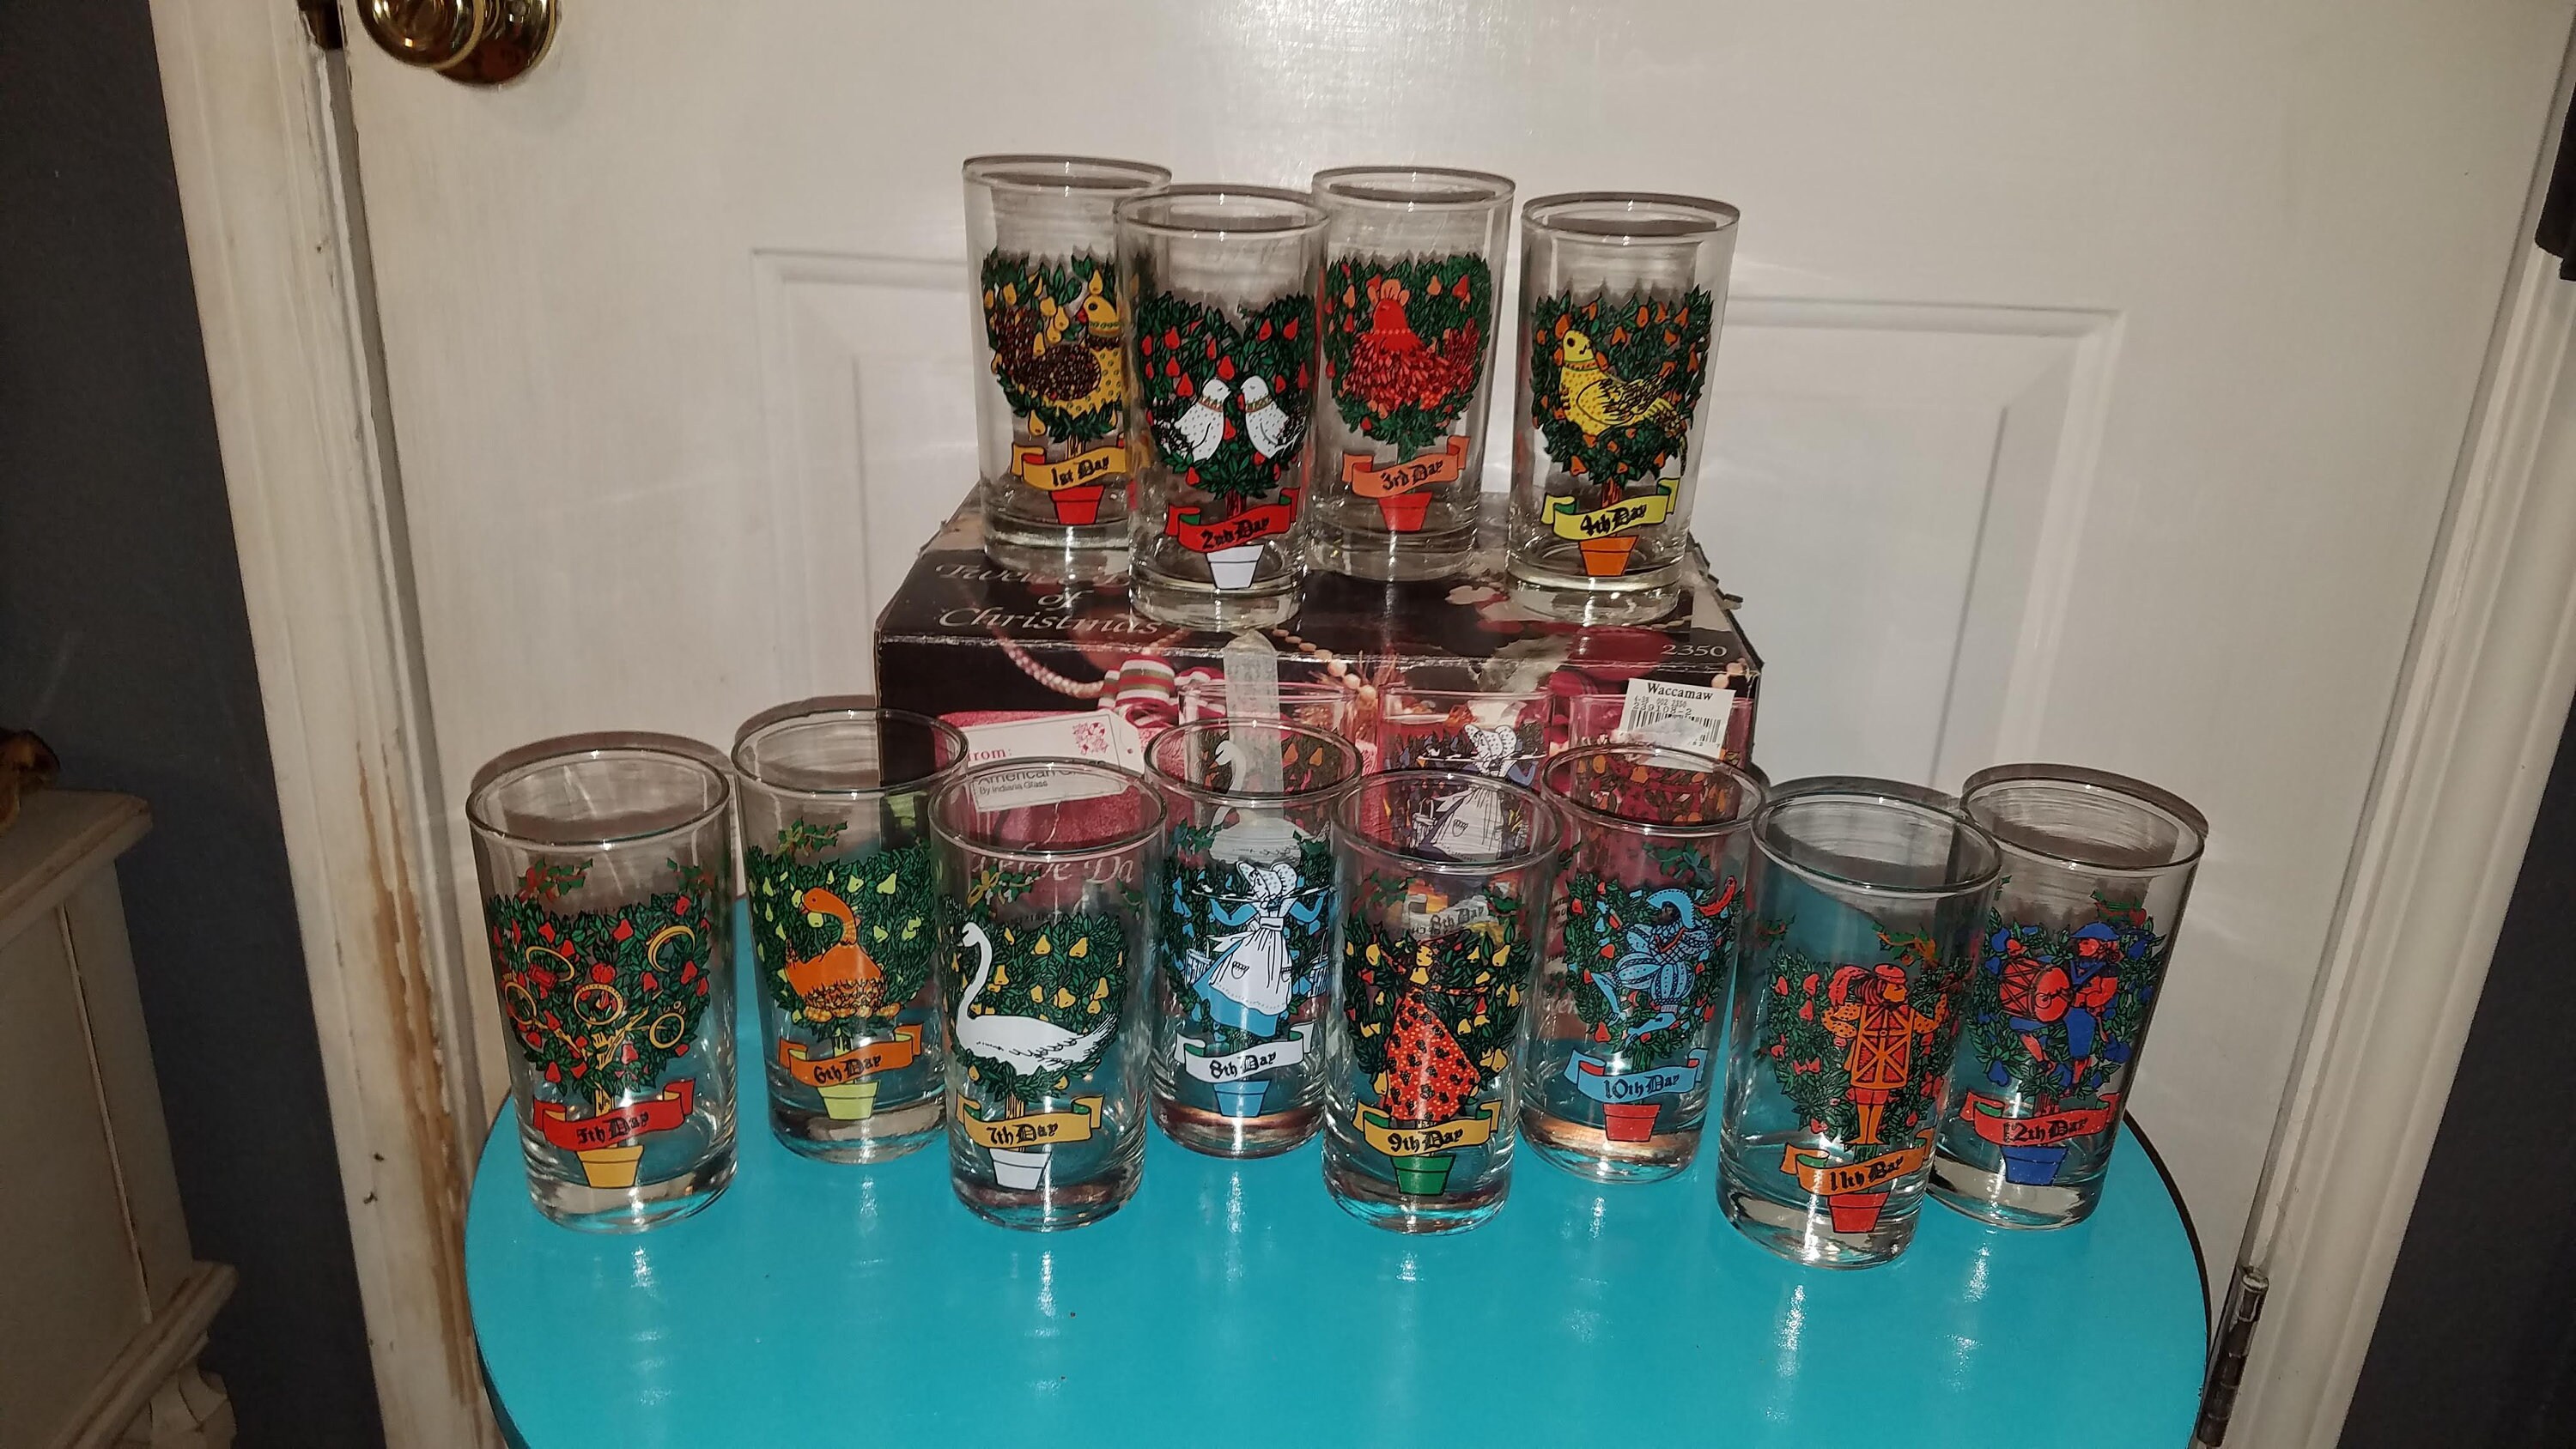 Set of 12 Christmas Tall Drinking Glasses - household items - by